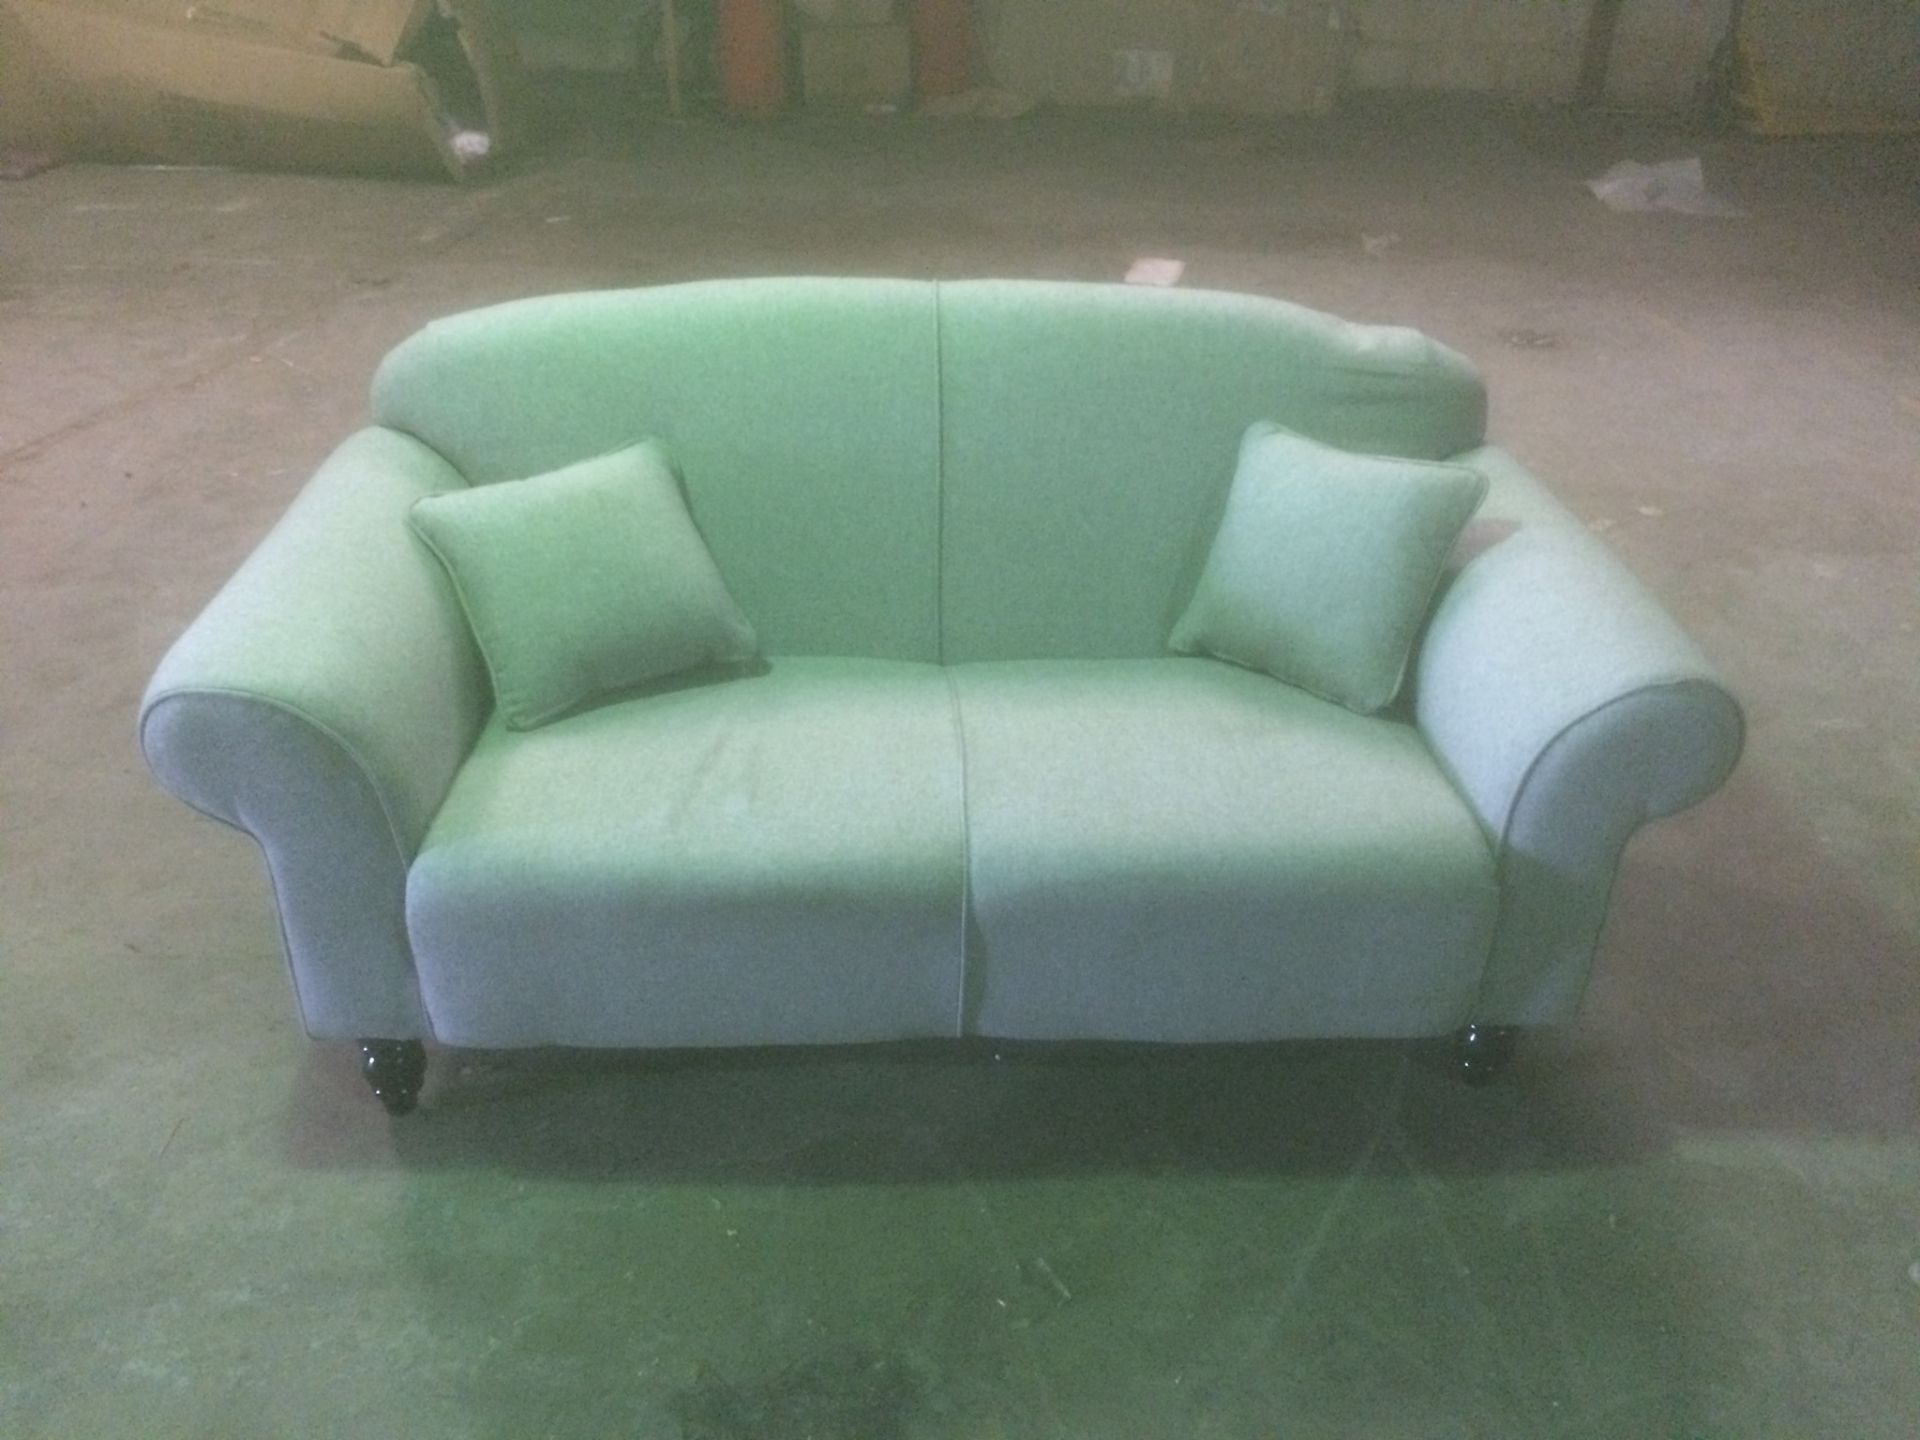 Musgrove 2 seater sofa in pale blue fabric with traditional arch wooden legs - Image 2 of 2